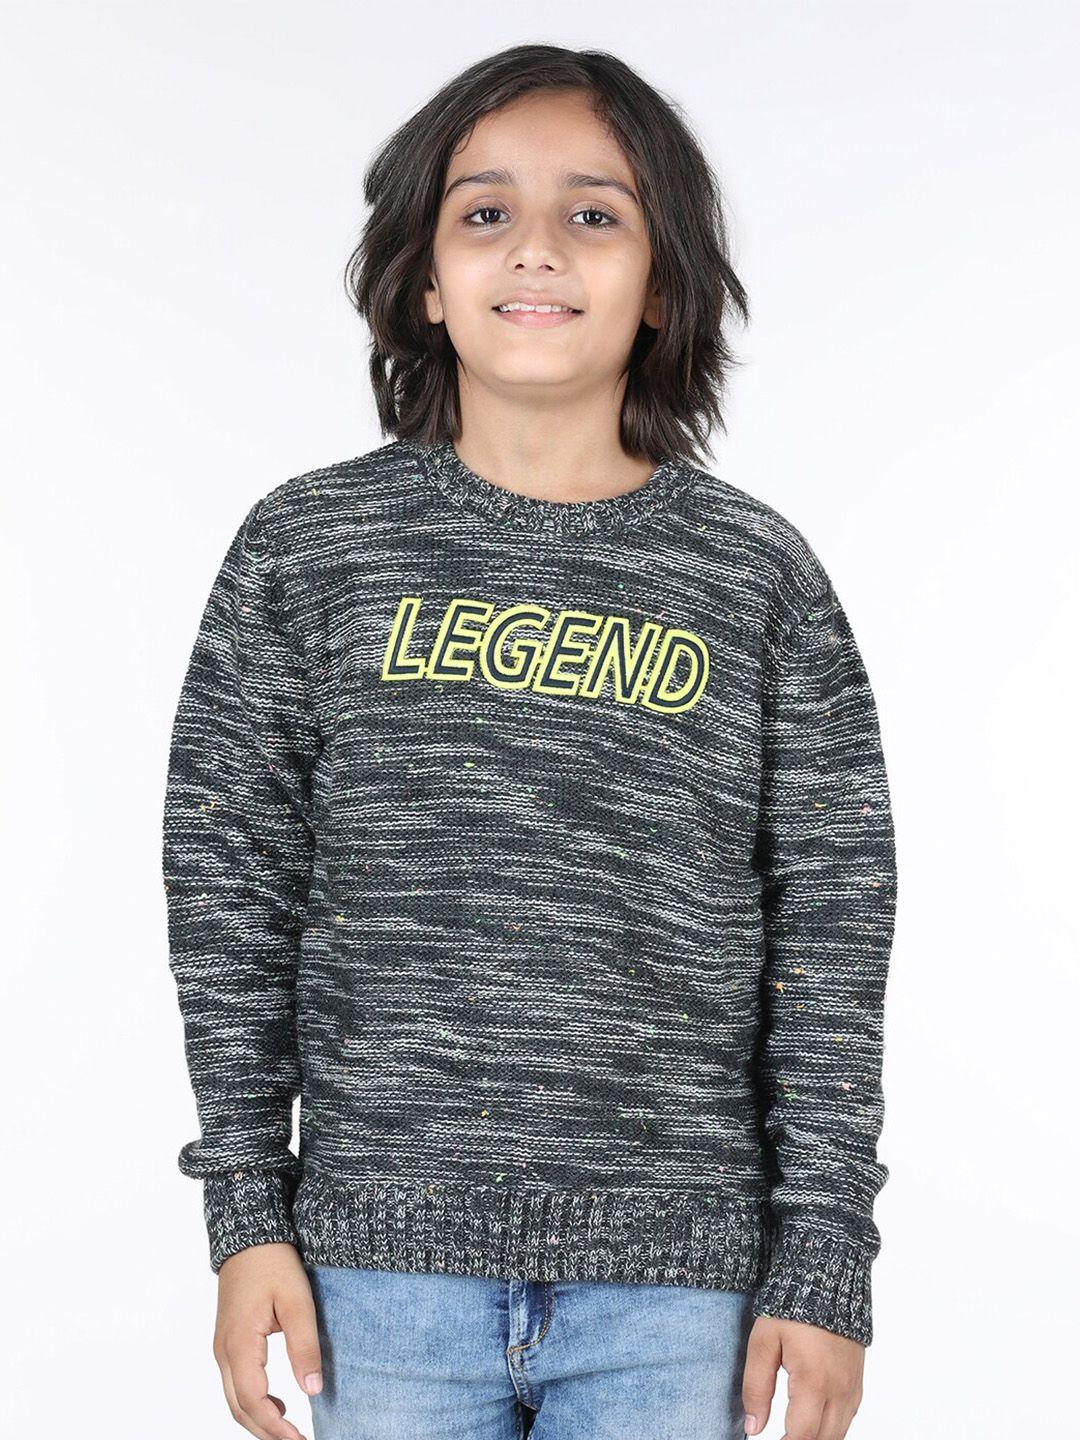 wingsfield boys typography embroidered acrylic pullover sweater